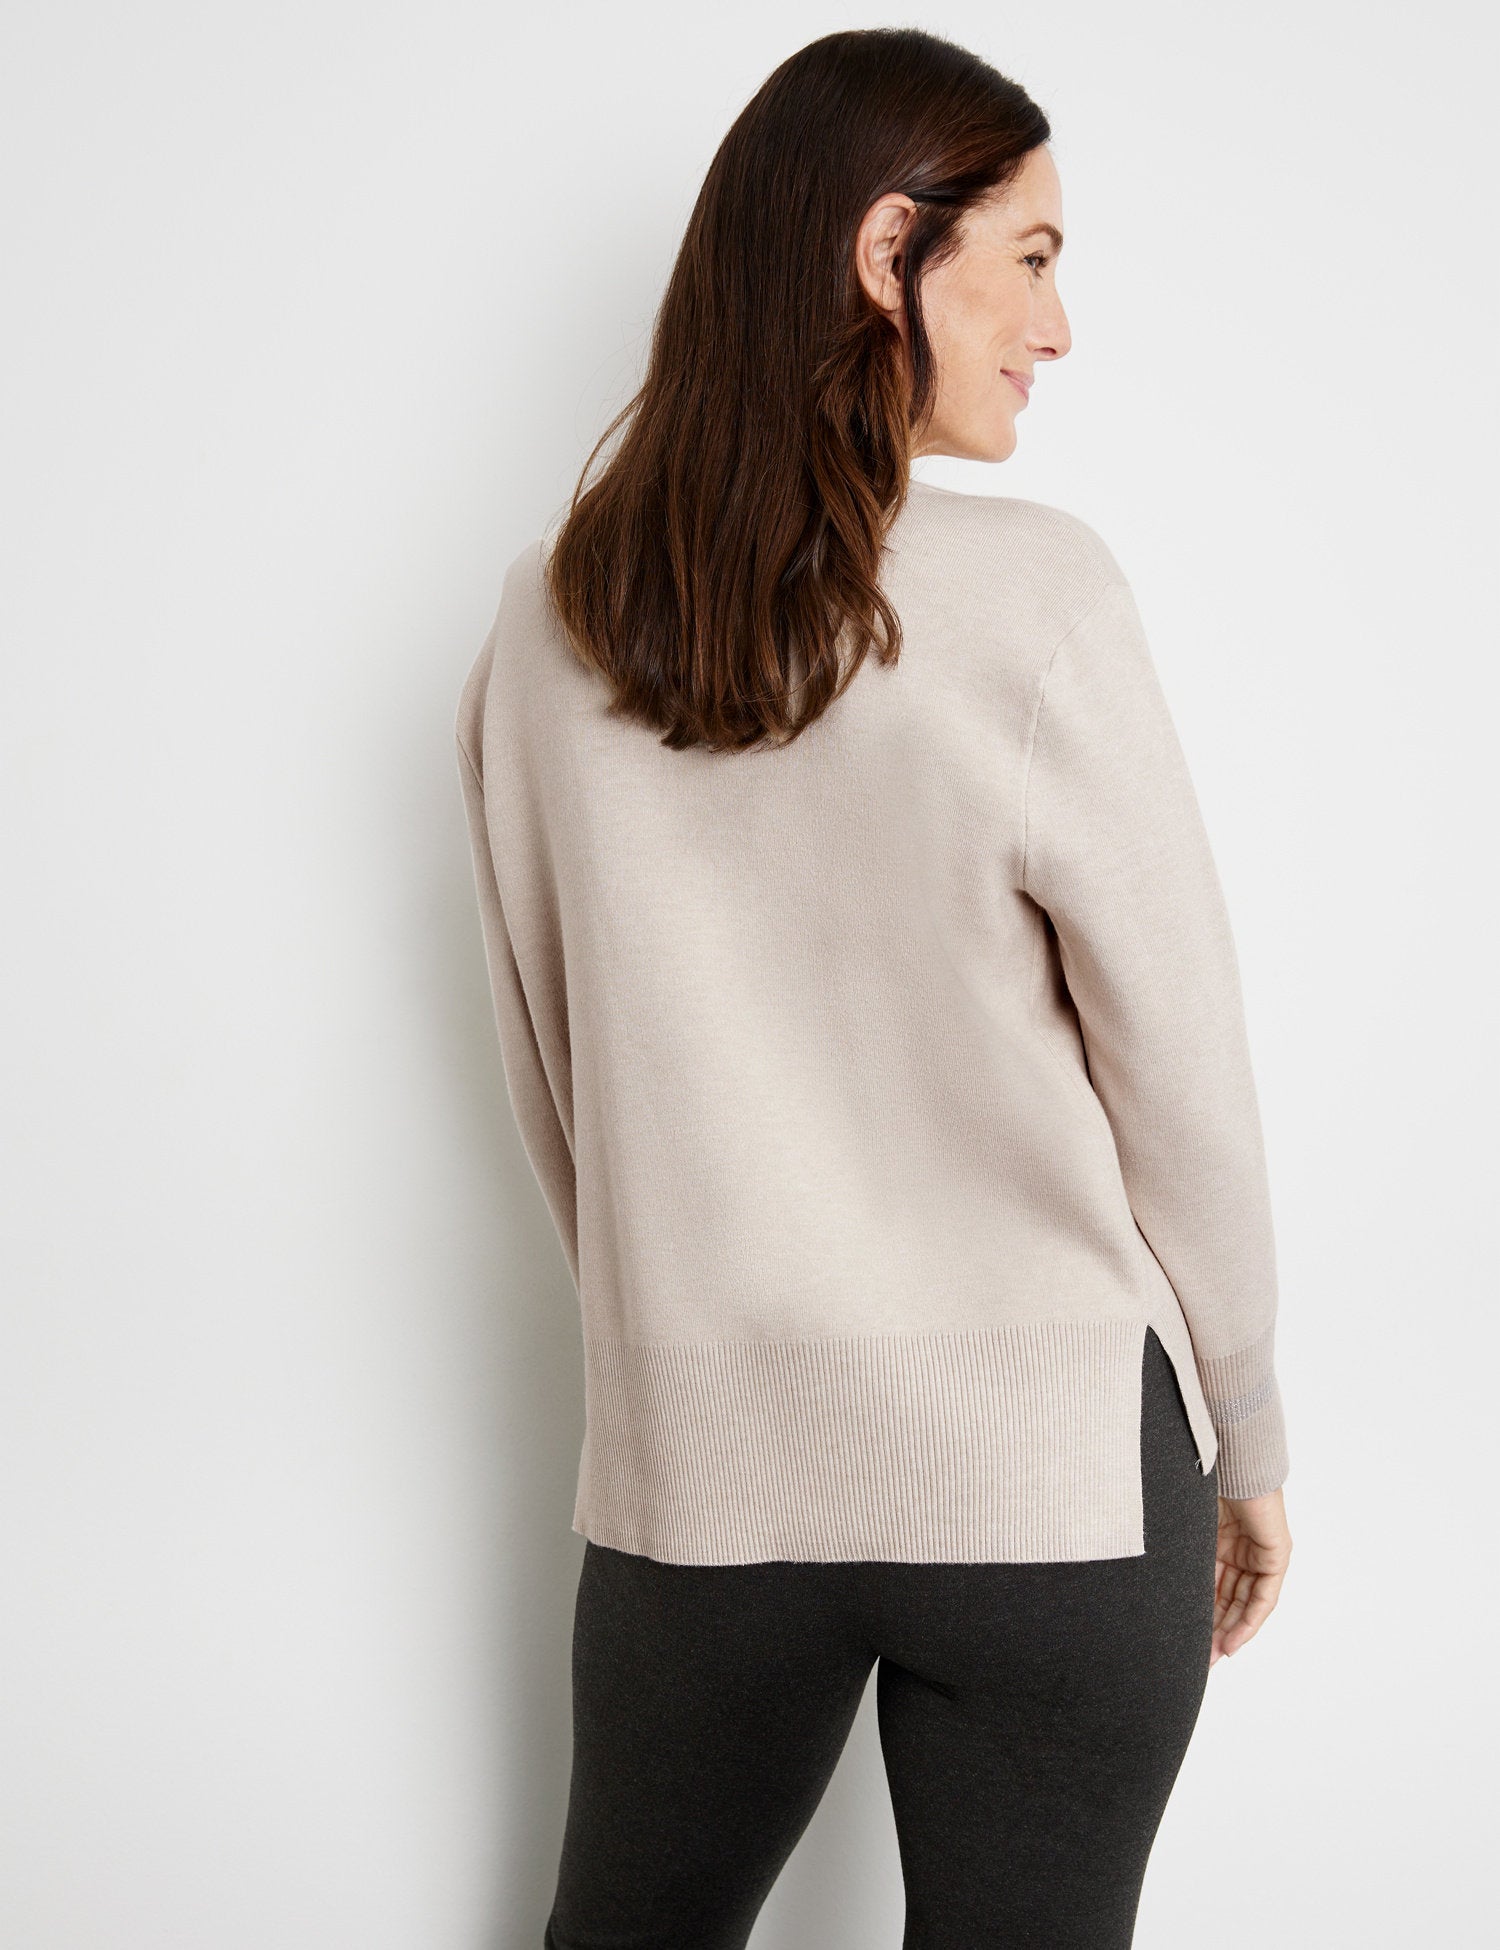 Soft Jumper With A Turtleneck And Elongated Back Section_271033-35708_905440_06